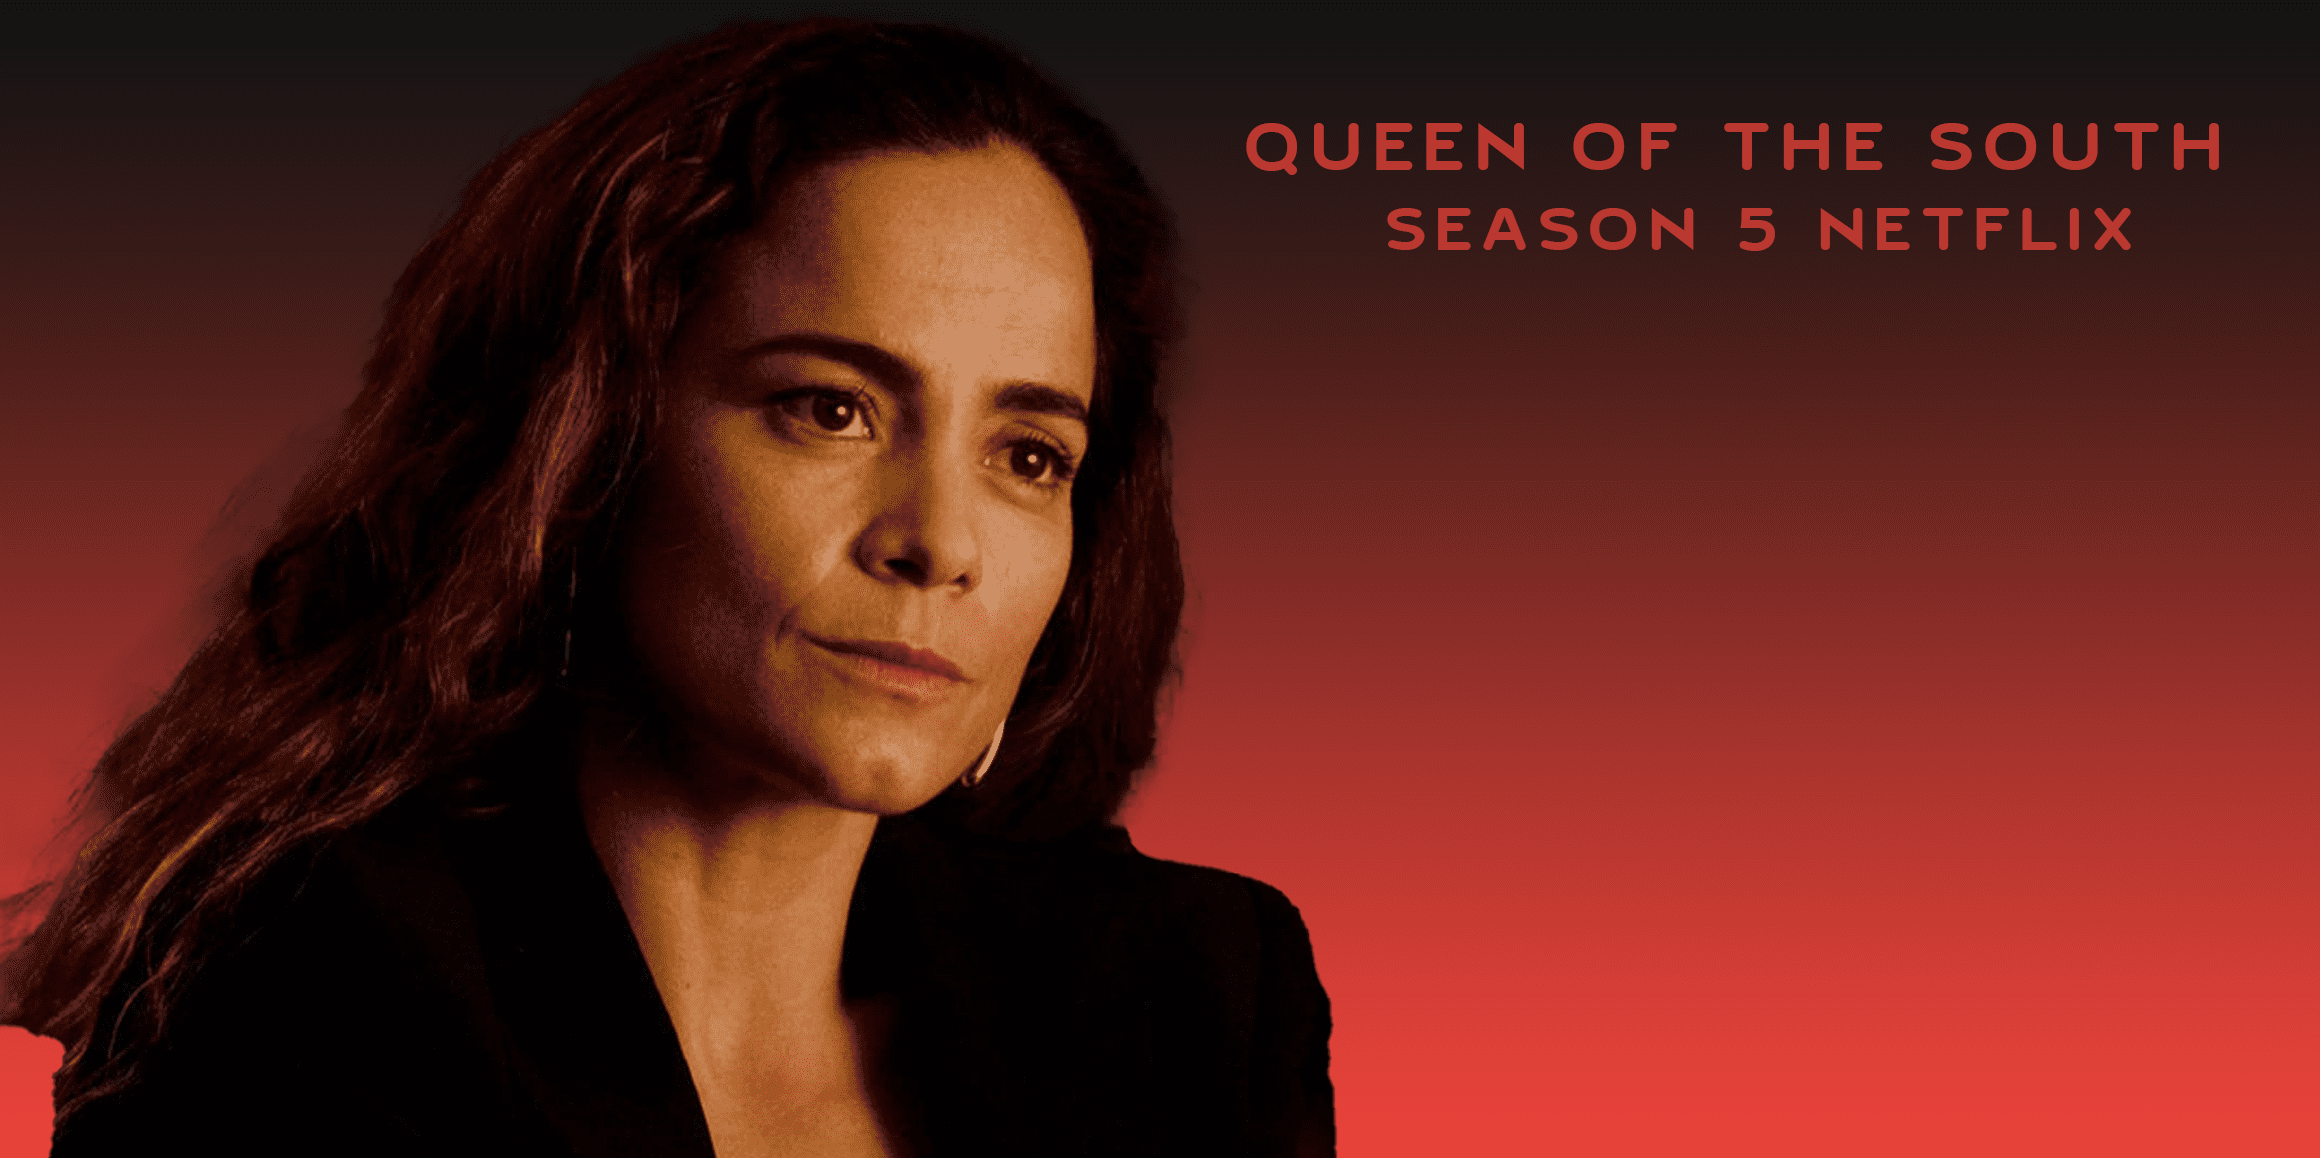 Season 5 of Queen of the South makes its way to Netflix